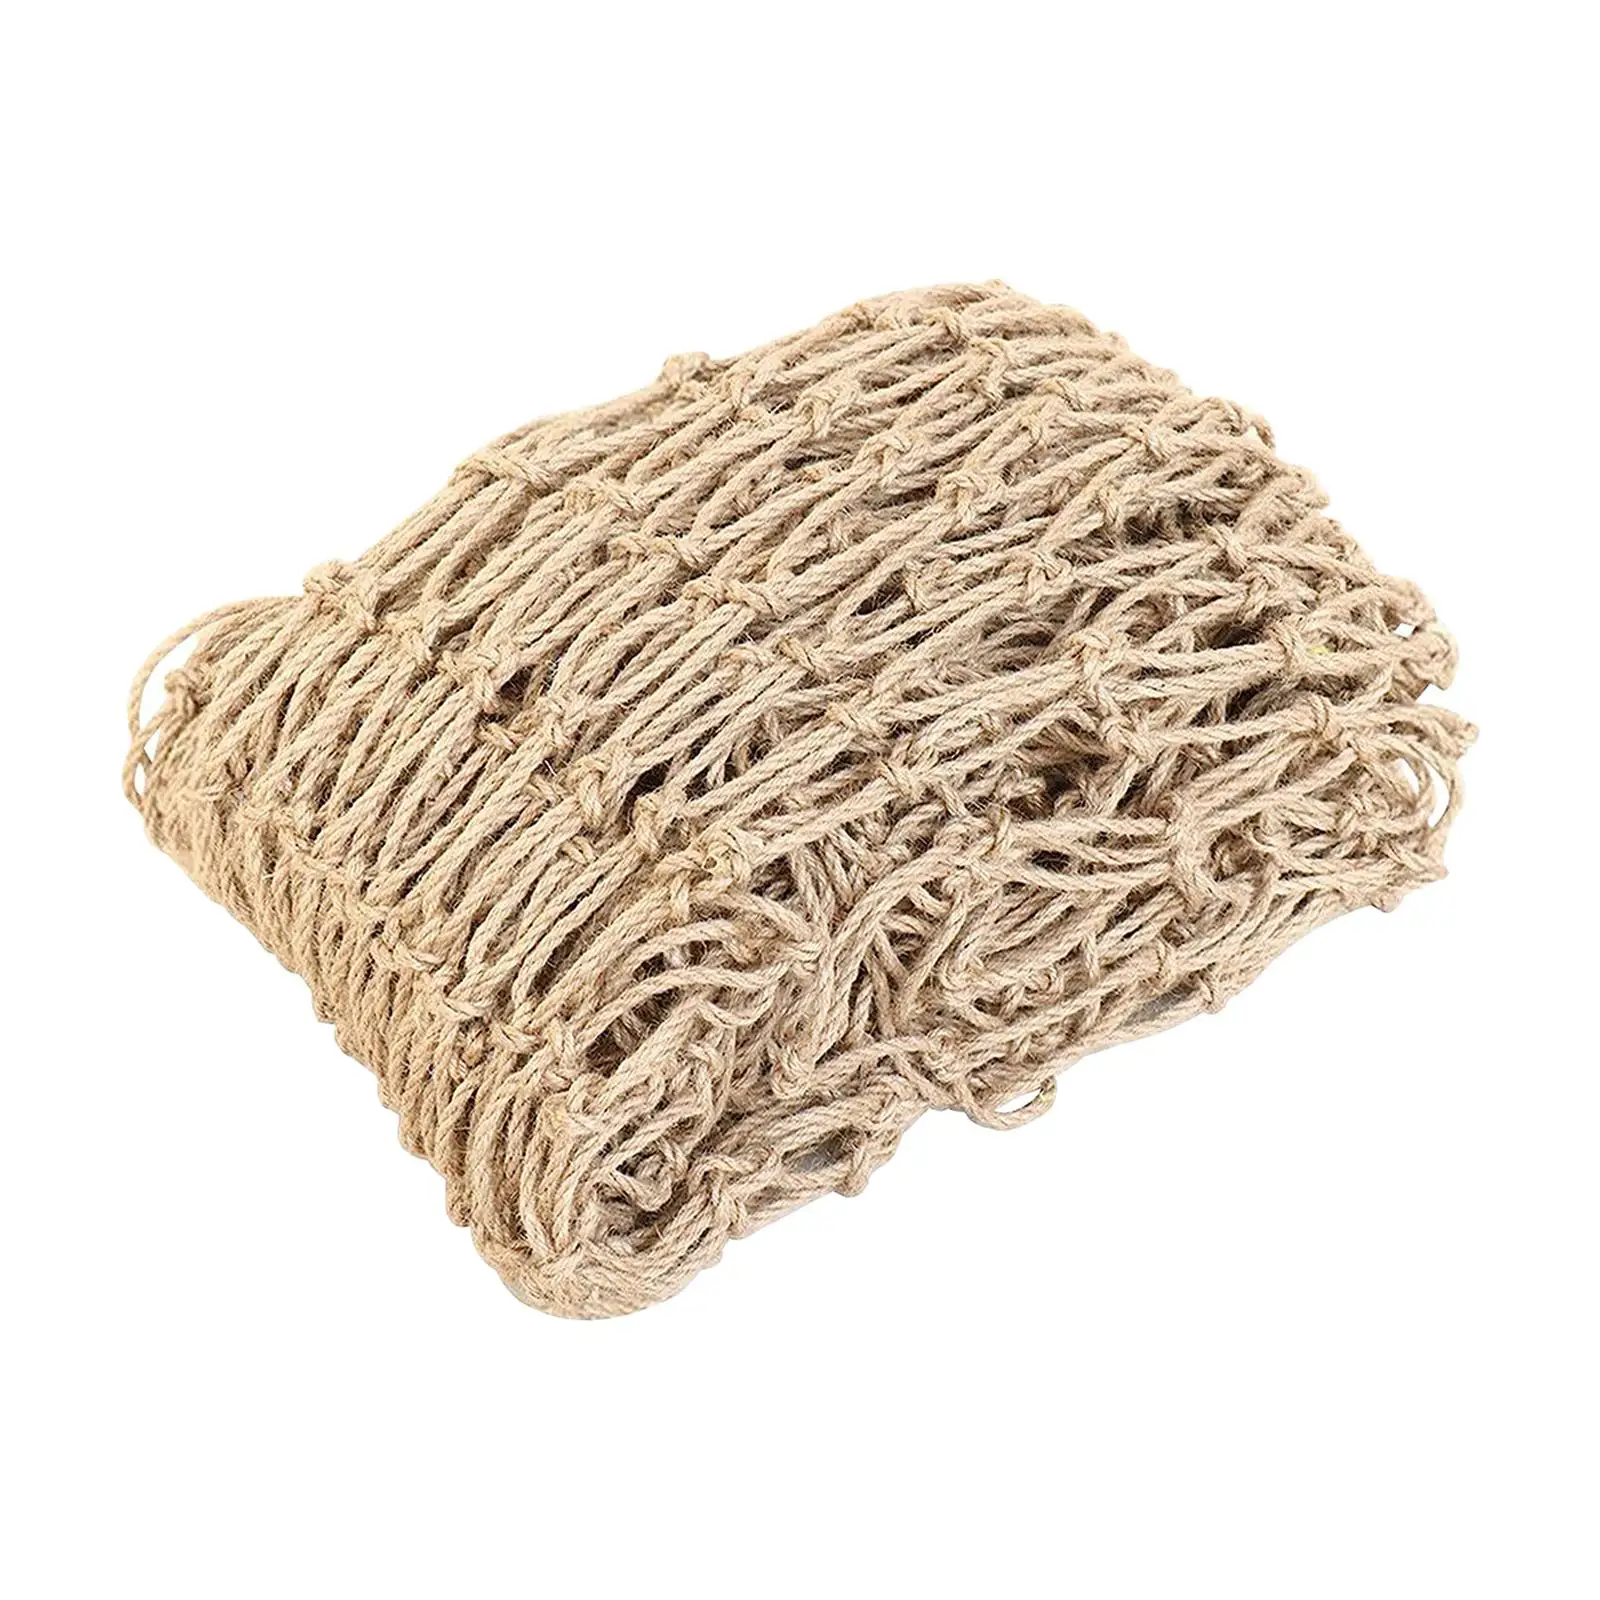 Plant Support Netting Heavy Duty Save Space 5M Garden Netting Trellis Twine for Vining Plants Grapes Cucumbers Bridge